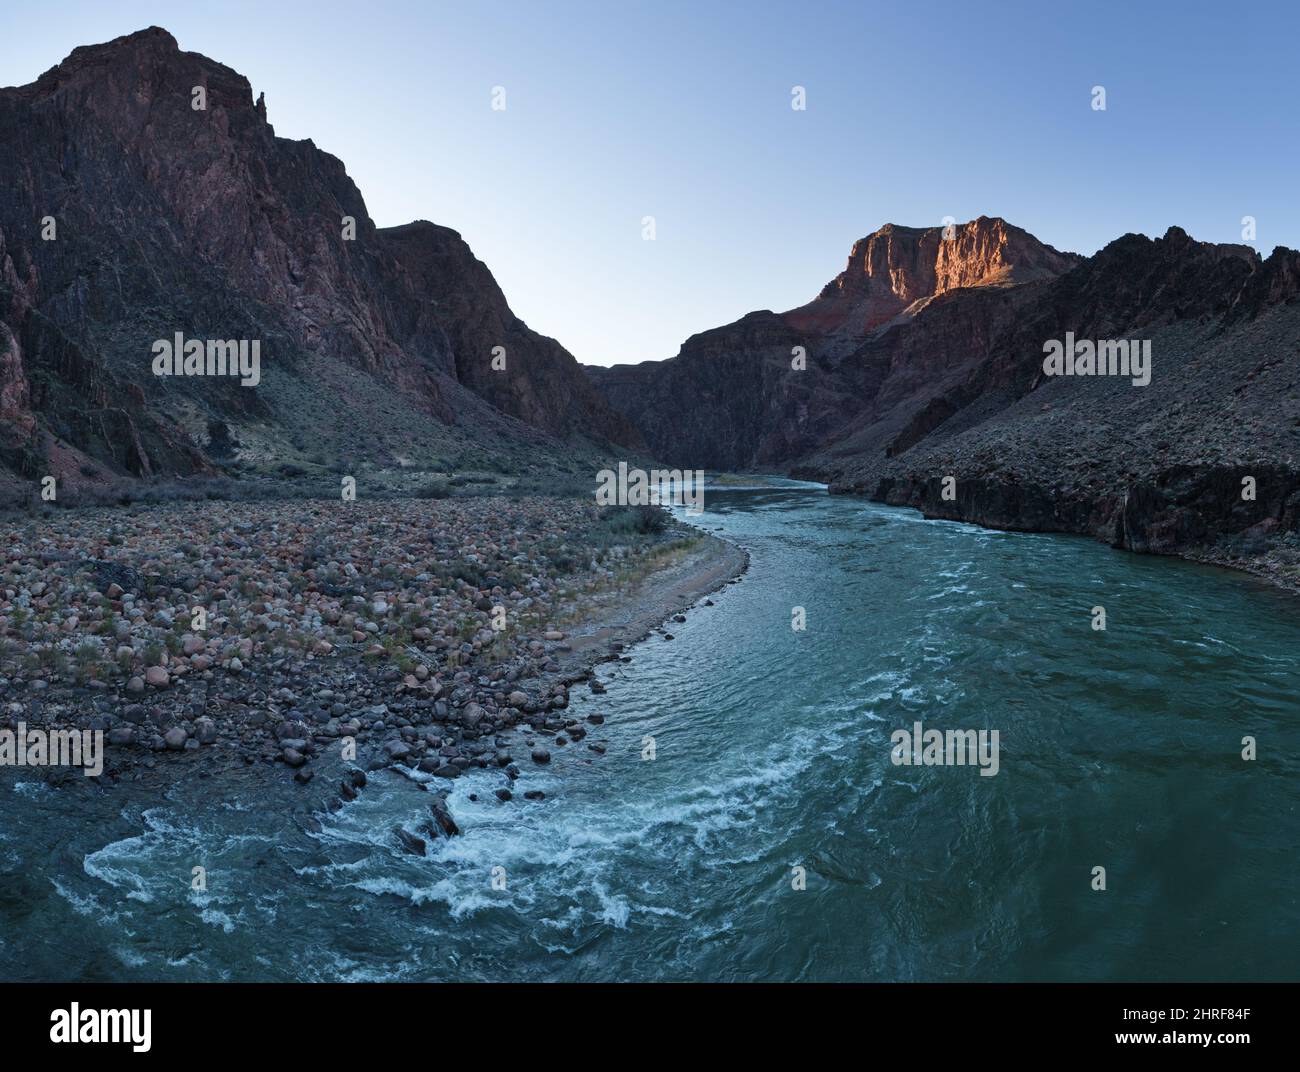 the Colorado River flows in the inner gorge of Grand Canyon National Park in Arizona Stock Photo